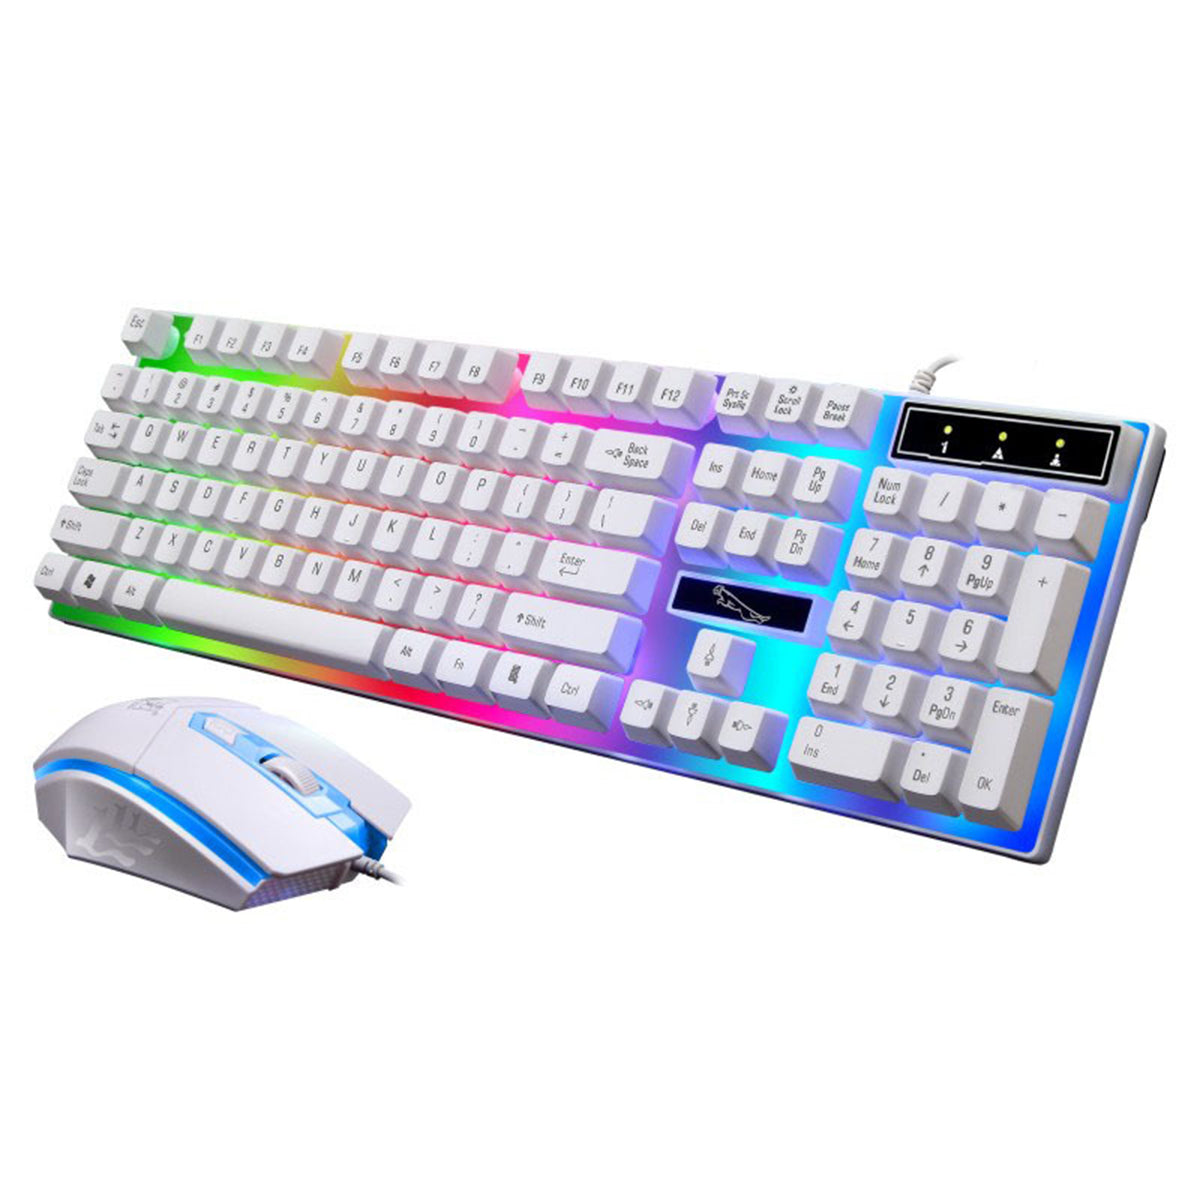 104 Keys Wired Keyboard and Mouse Set Colorful Backlight LED Mechanical Pro Gaming Keyboard for Home Office Notebook